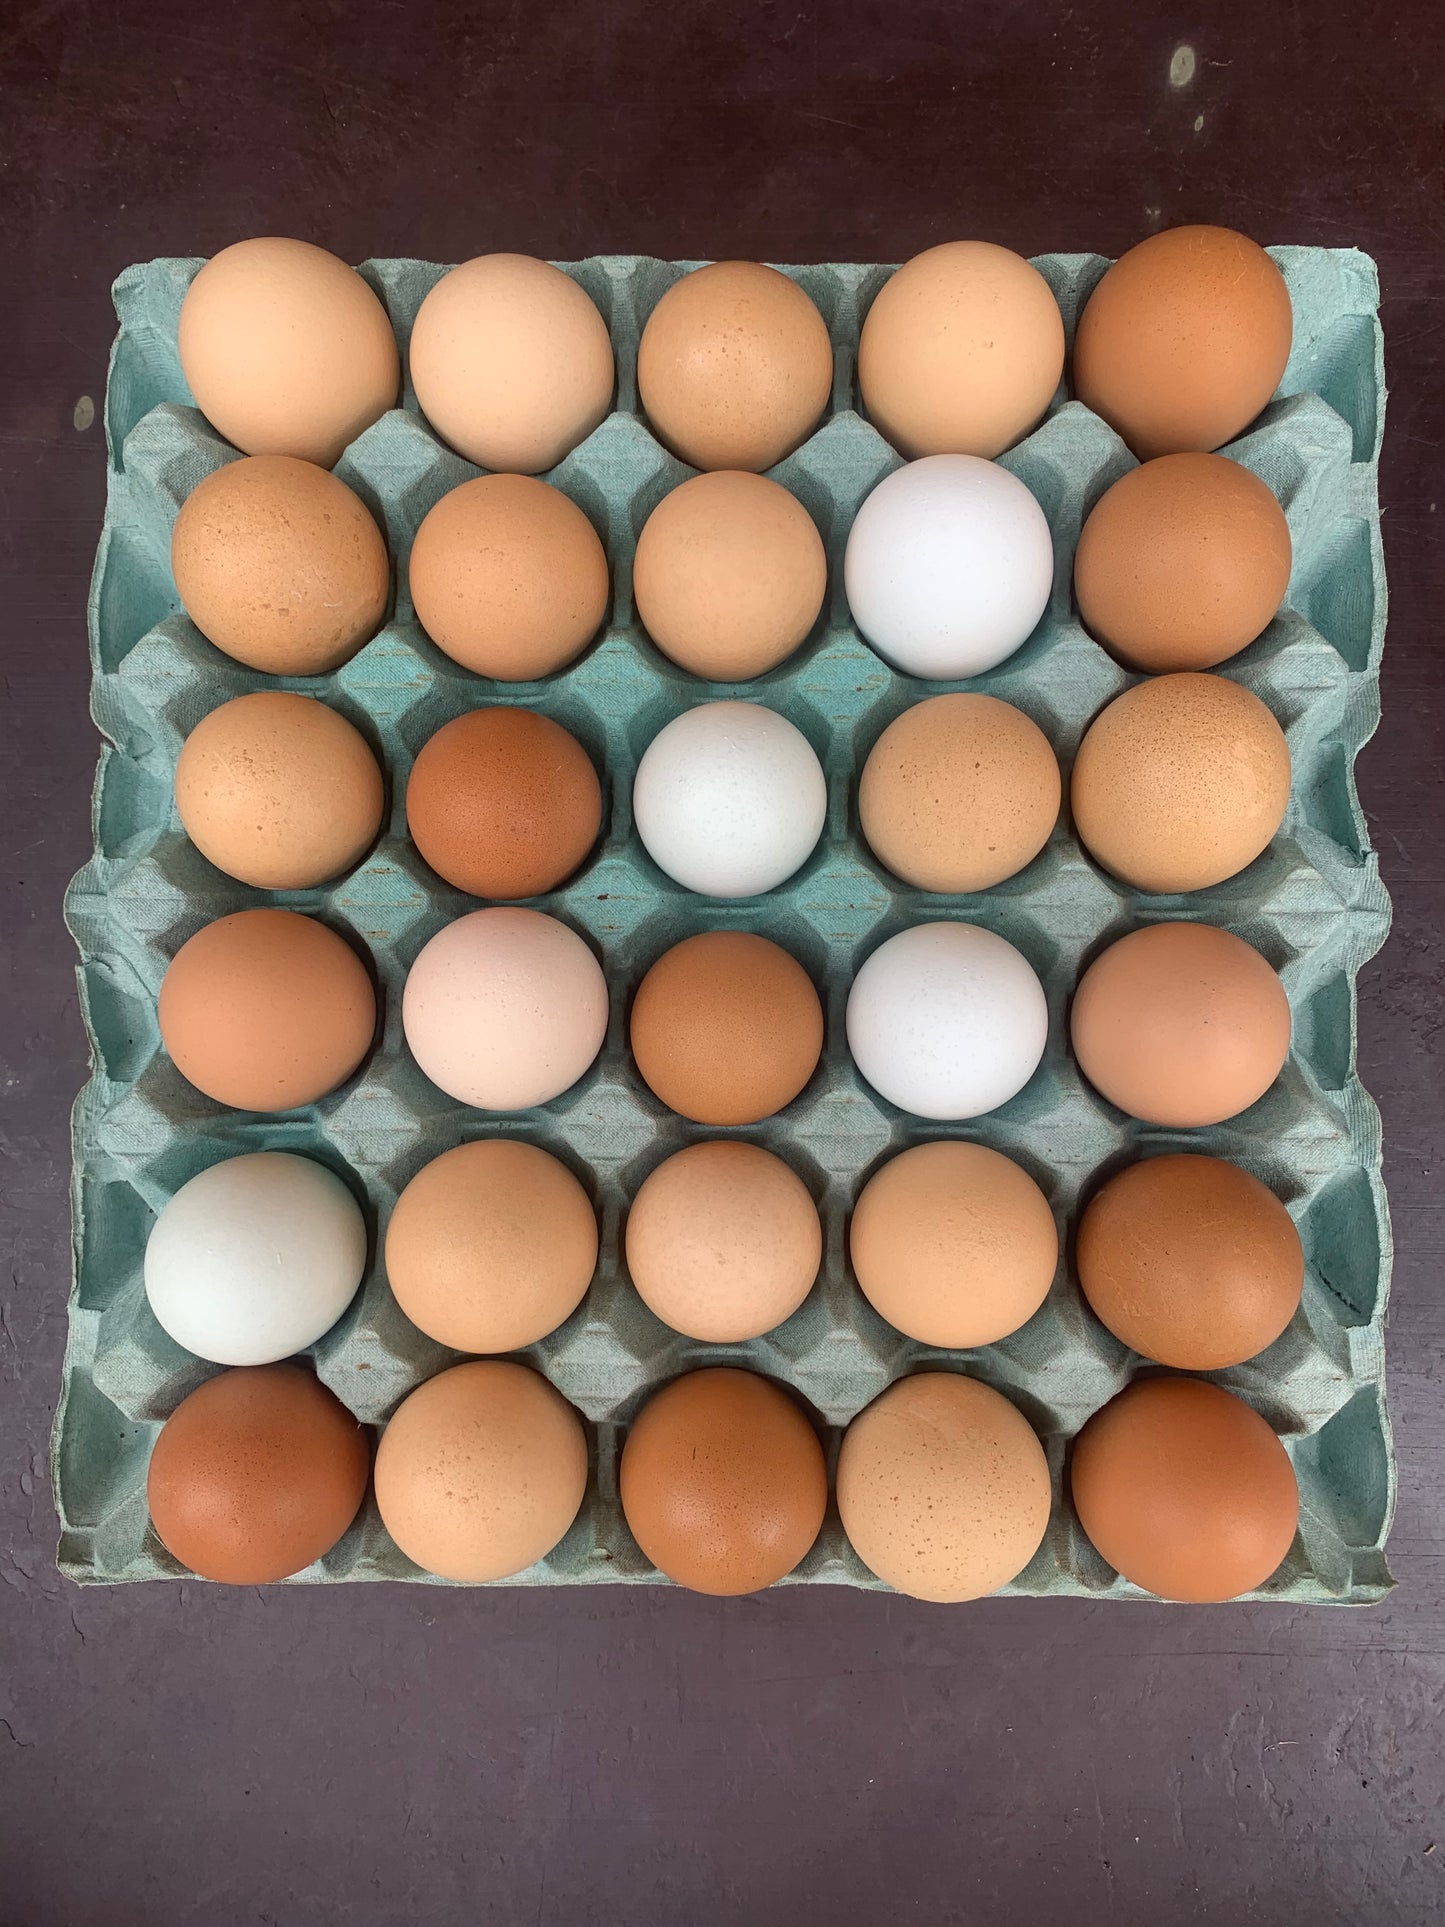 30 Hill Farm Eggs - local collection - please don't order if you can't collect from the farm as we are unable to send by courier! Thanks :-)